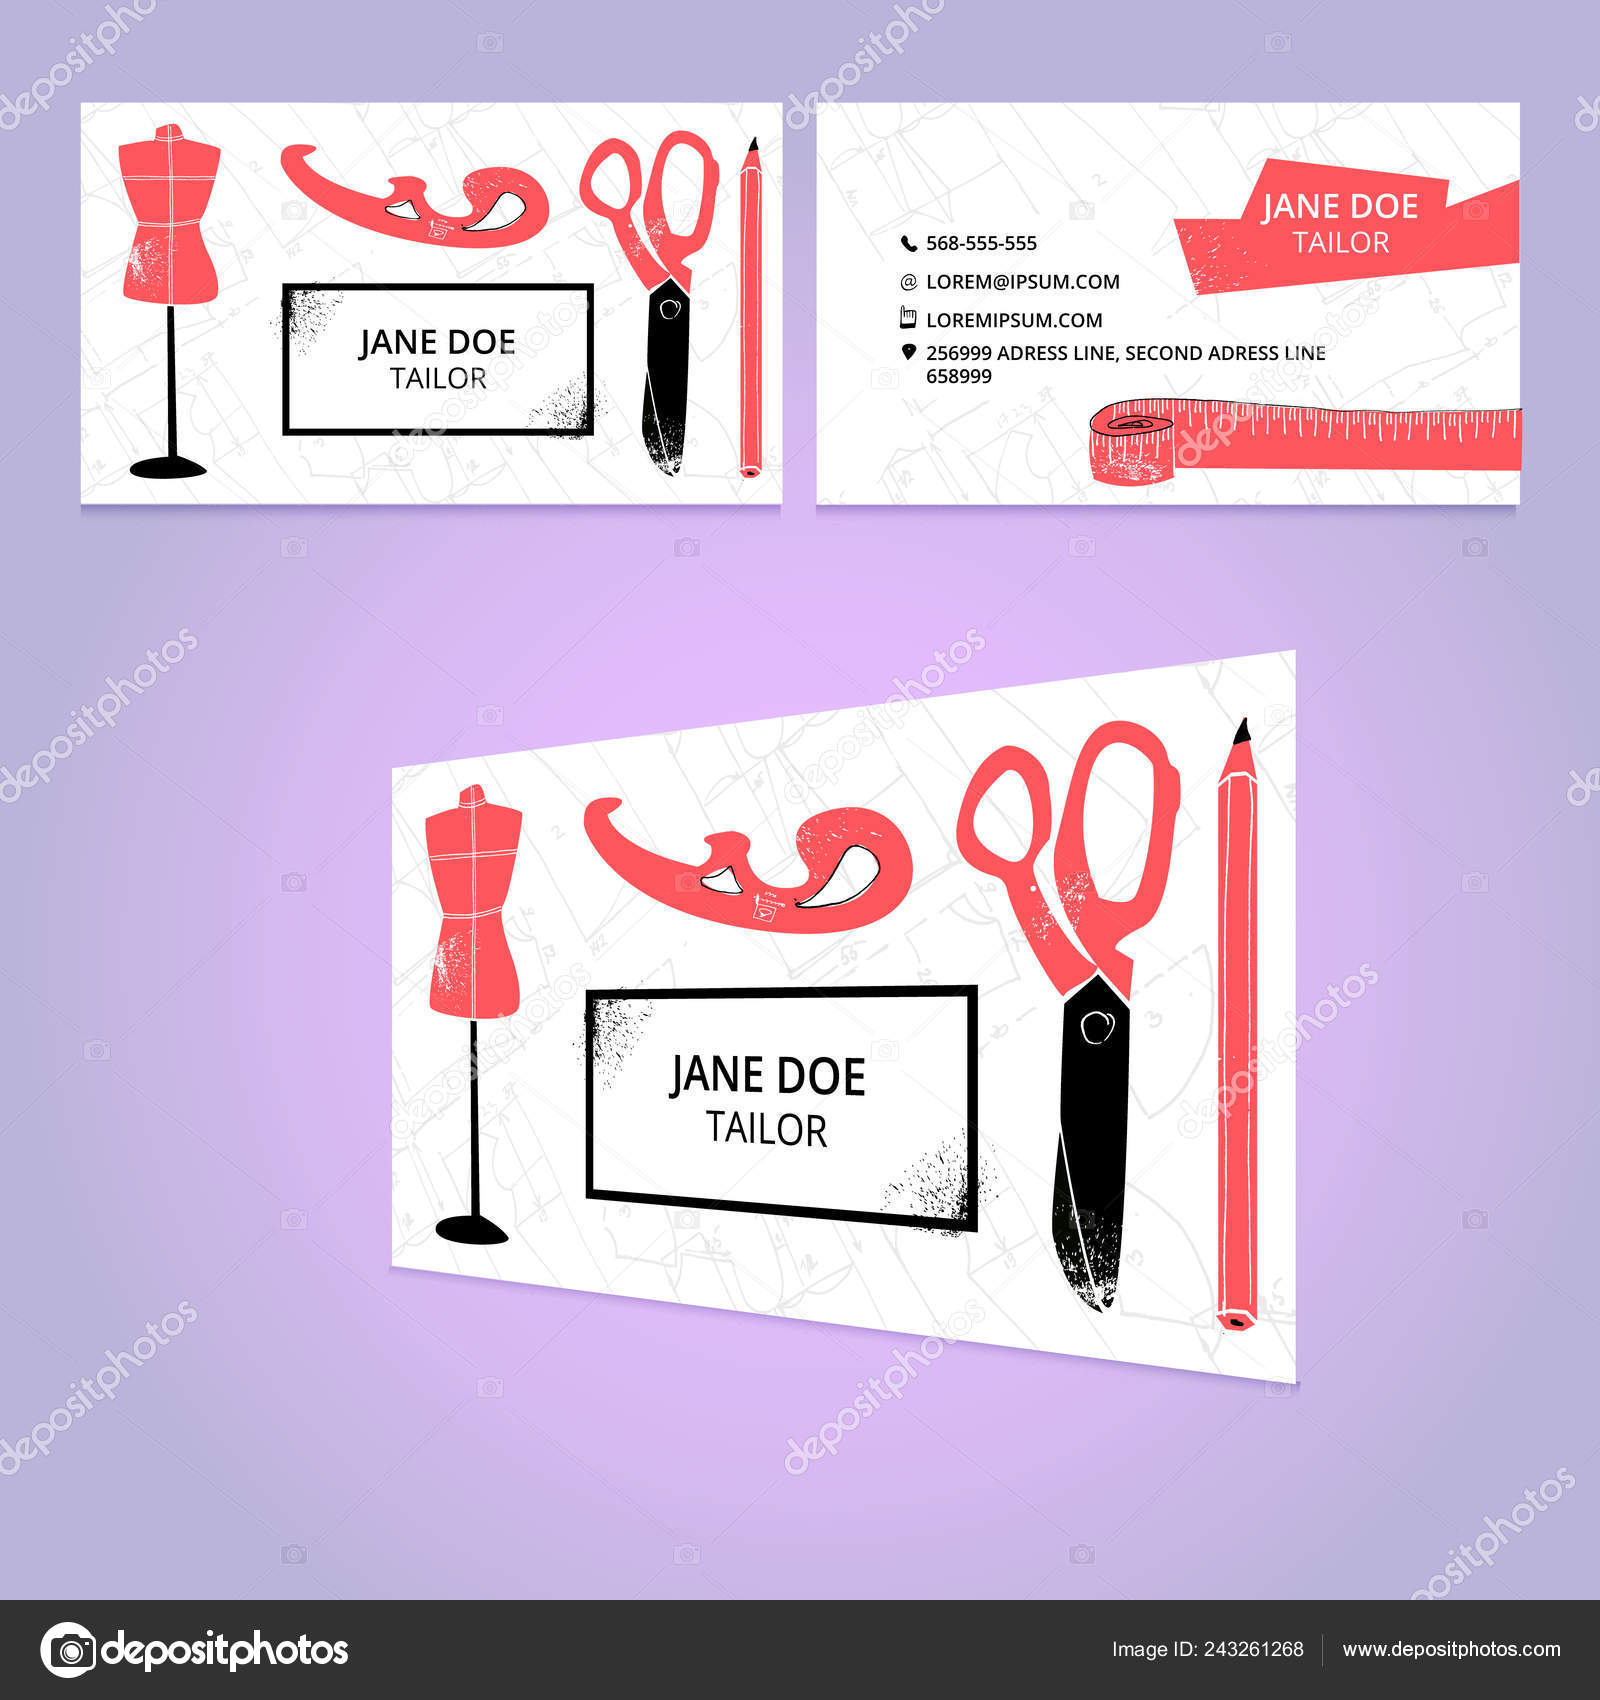 Tailor services business card template for websites vector illustration EPS10